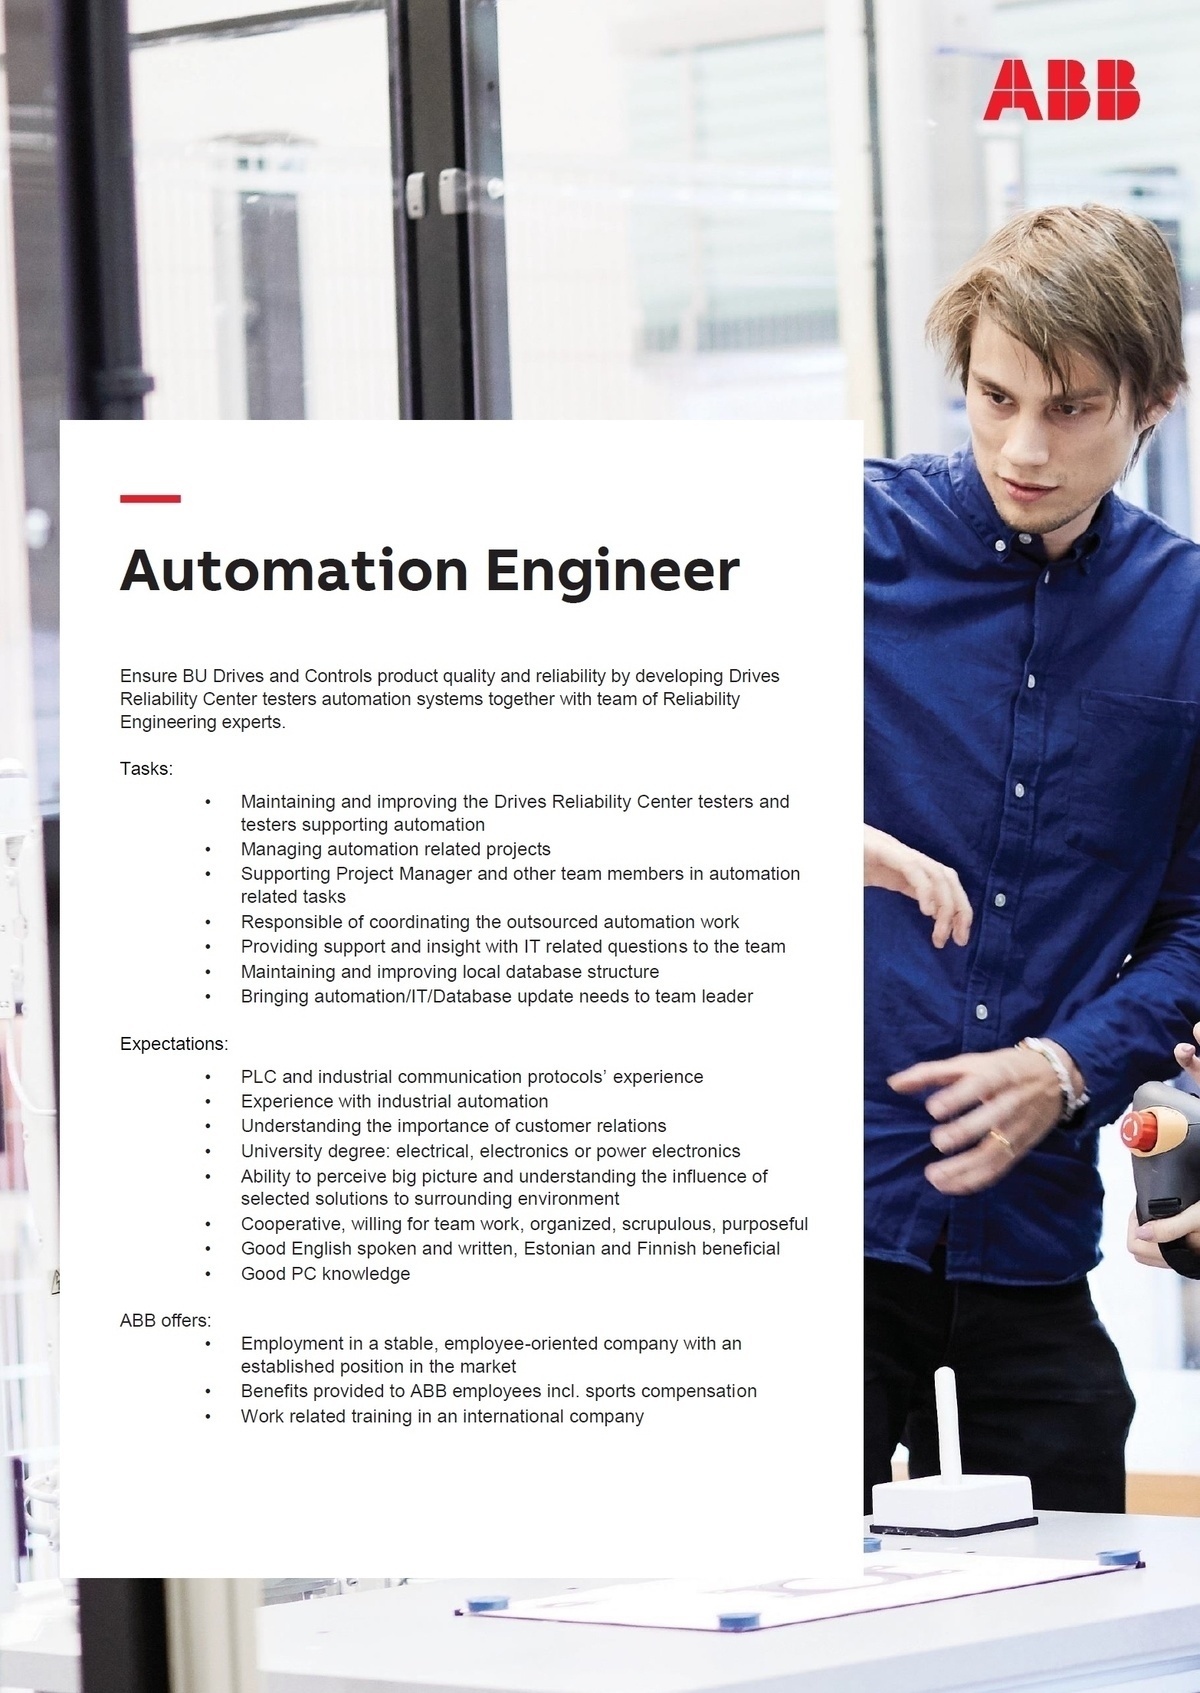 ABB AS Automation Engineer